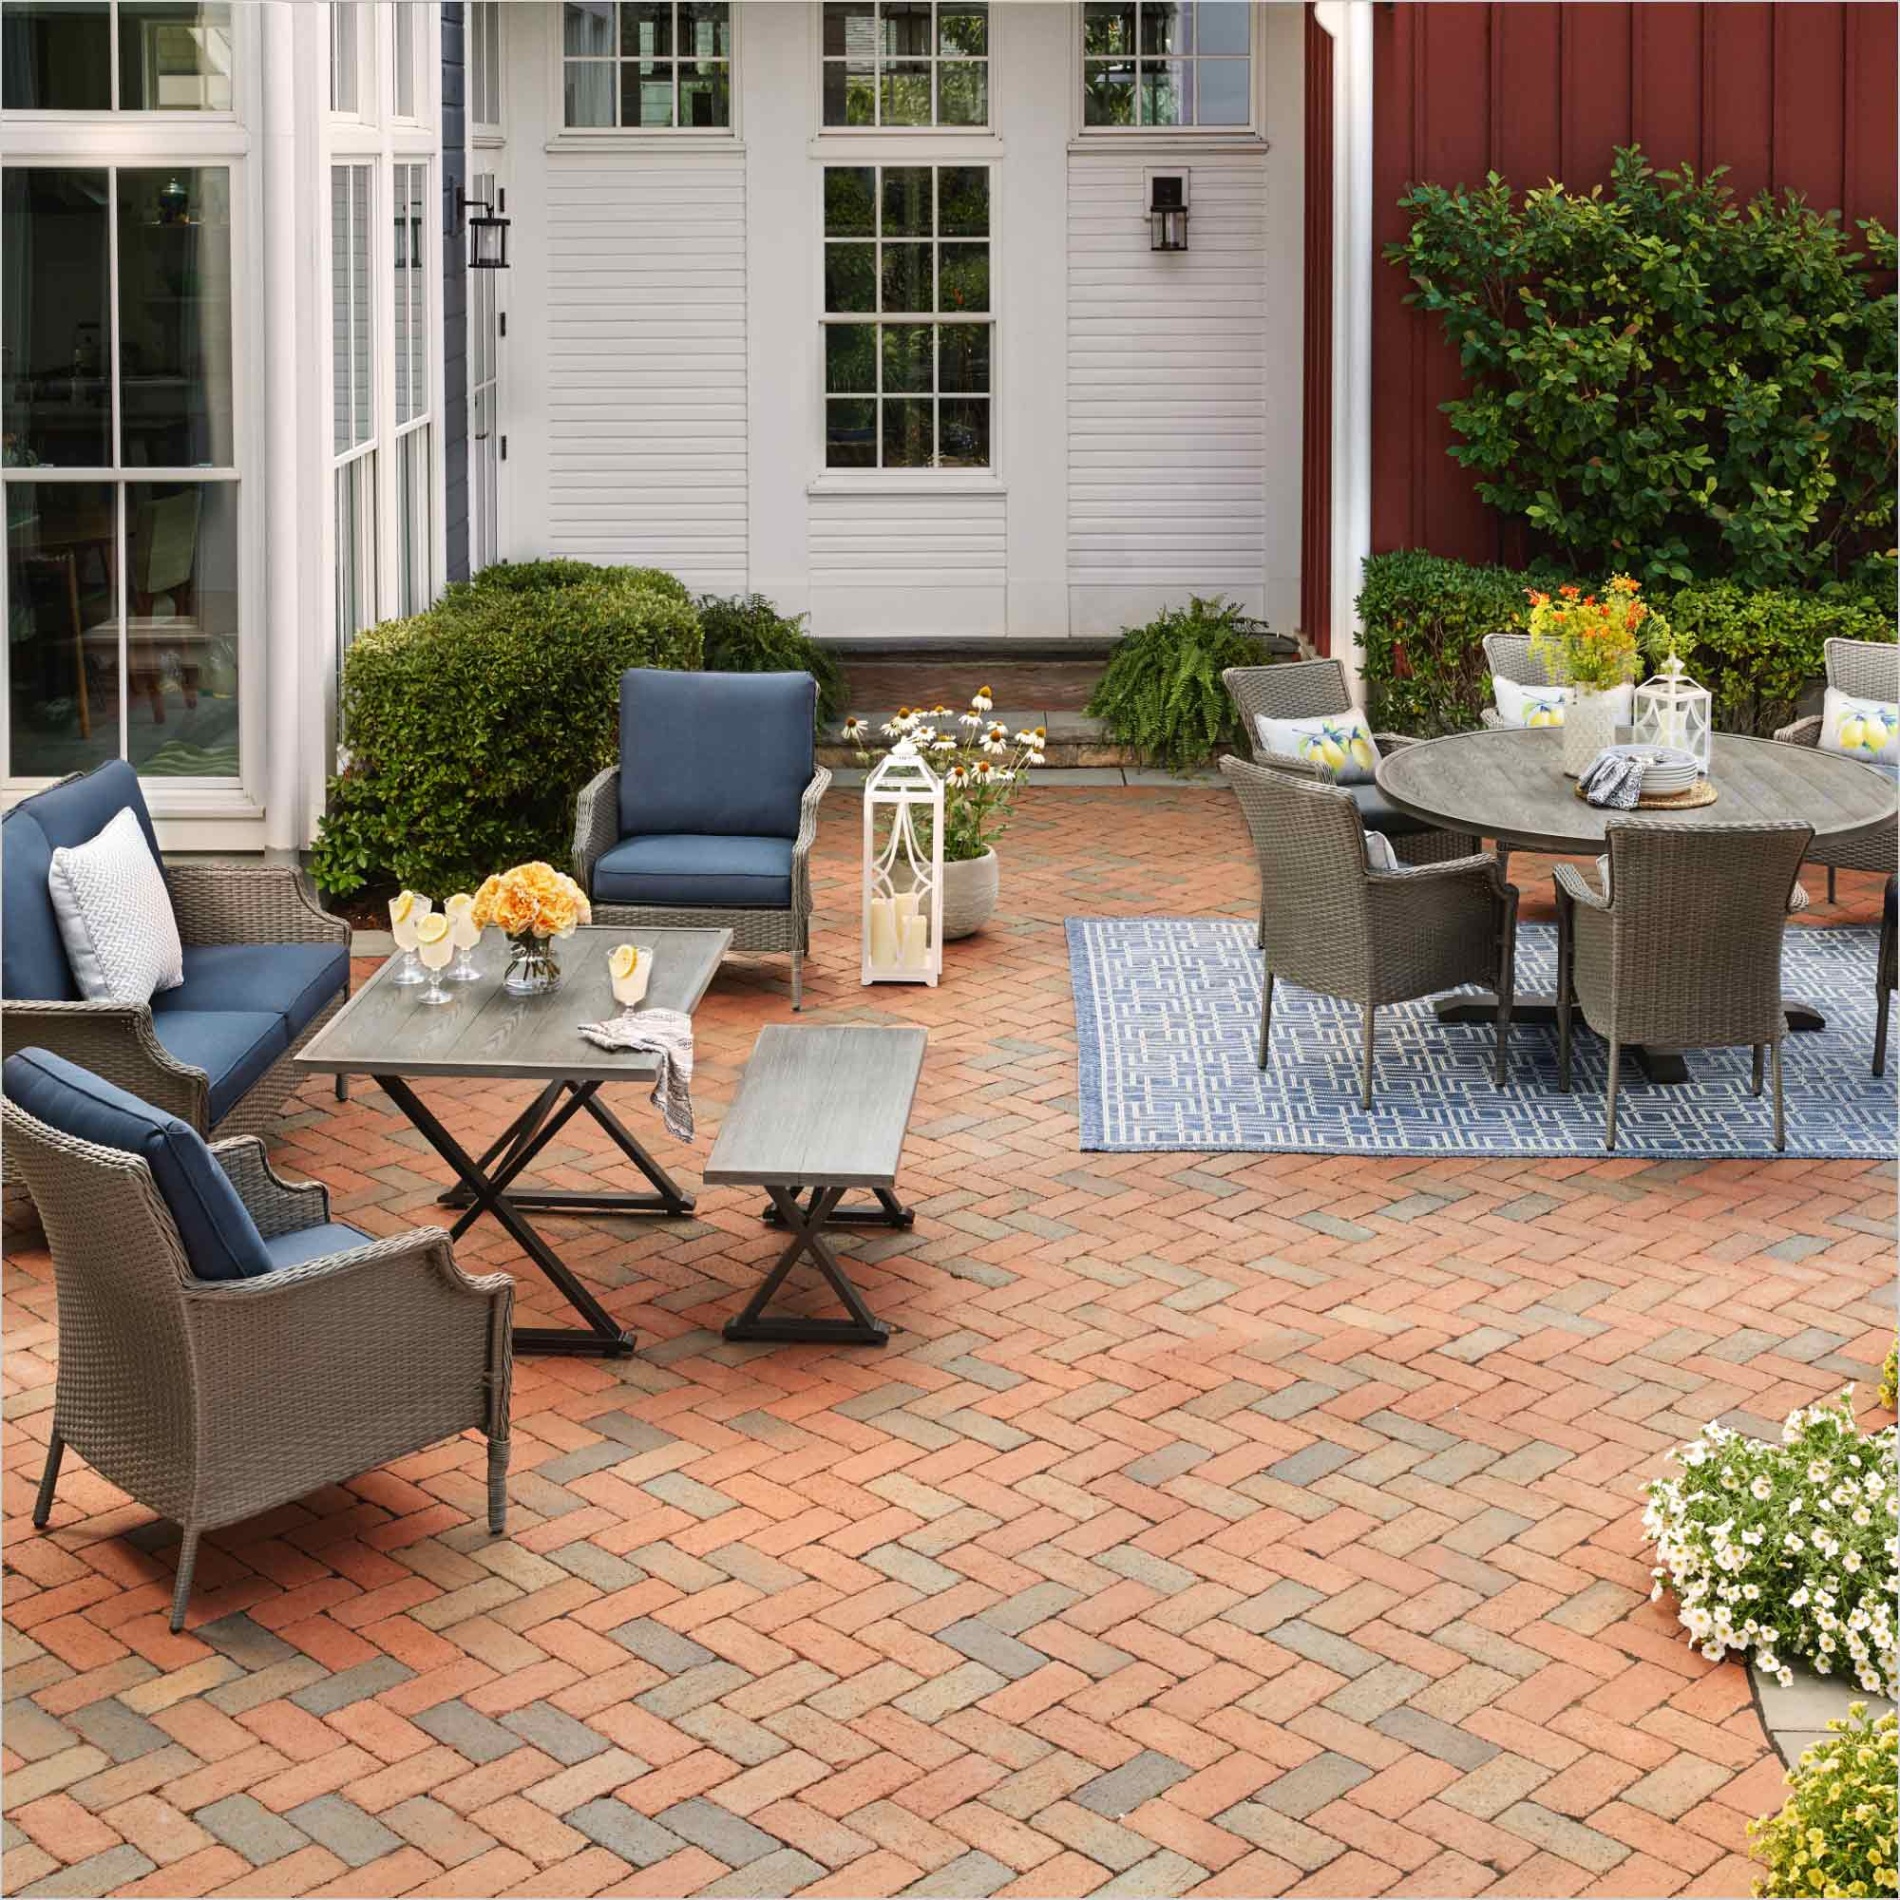 brick patios designs Bulan 2 Brick Patio Patterns Your Customers Will Love - The Home Depot